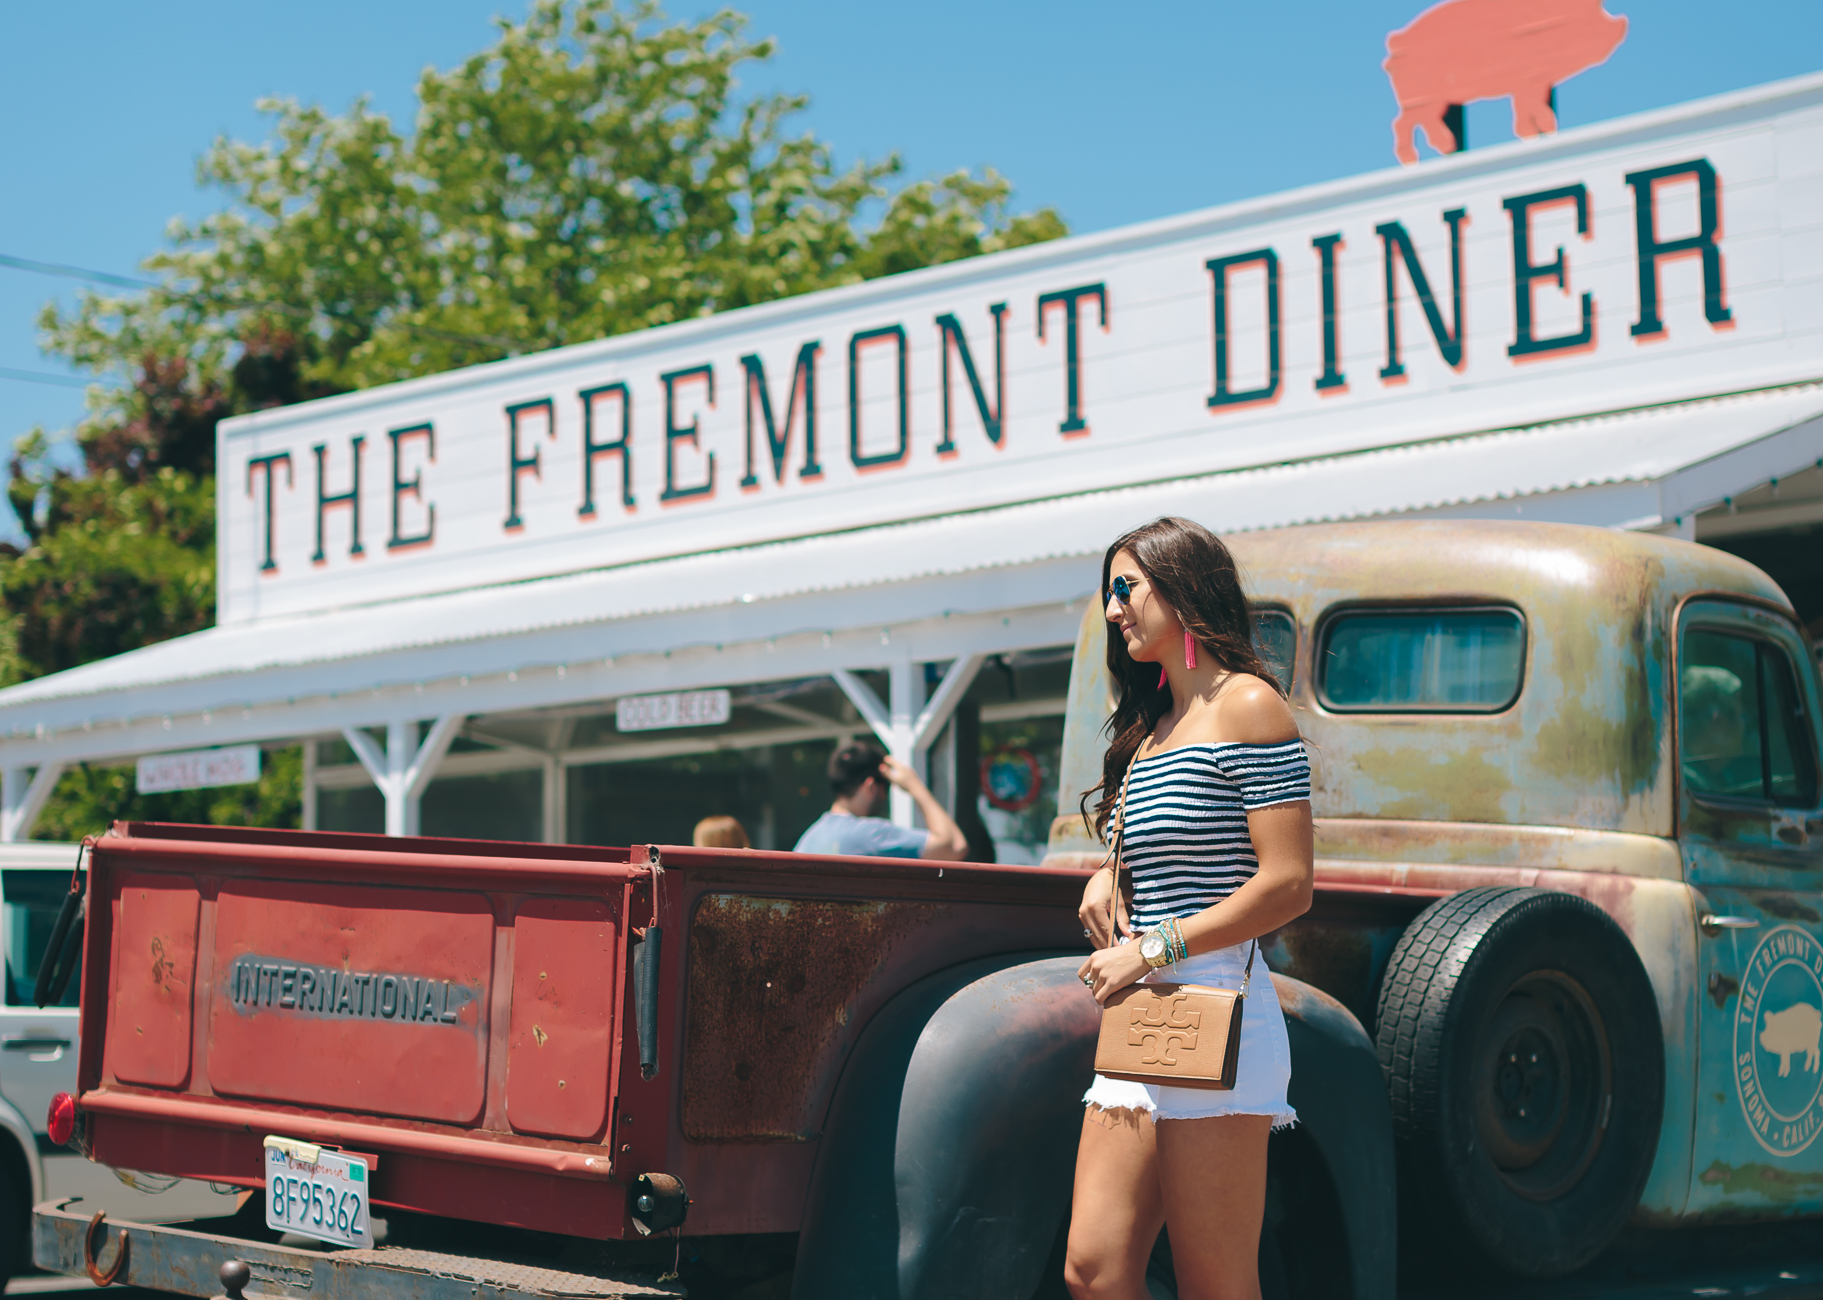 fremont diner, sonoma diner, sonoma dive, wine country diner, stripe off the shoulder top , stripe top, stripe crop top, off the shoulder crop top, high waisted denim shorts, high waist shorts, fringe sandals, sam edelman tassel sandals, tassel jewelry, tassel earrings, tory burch cognac crossbody bag, chan luu wrap bracelets, turquise wrap bracelets, casual style, vacation fashion, vacation style, fashion blogger // grace wainwright a southern drawl